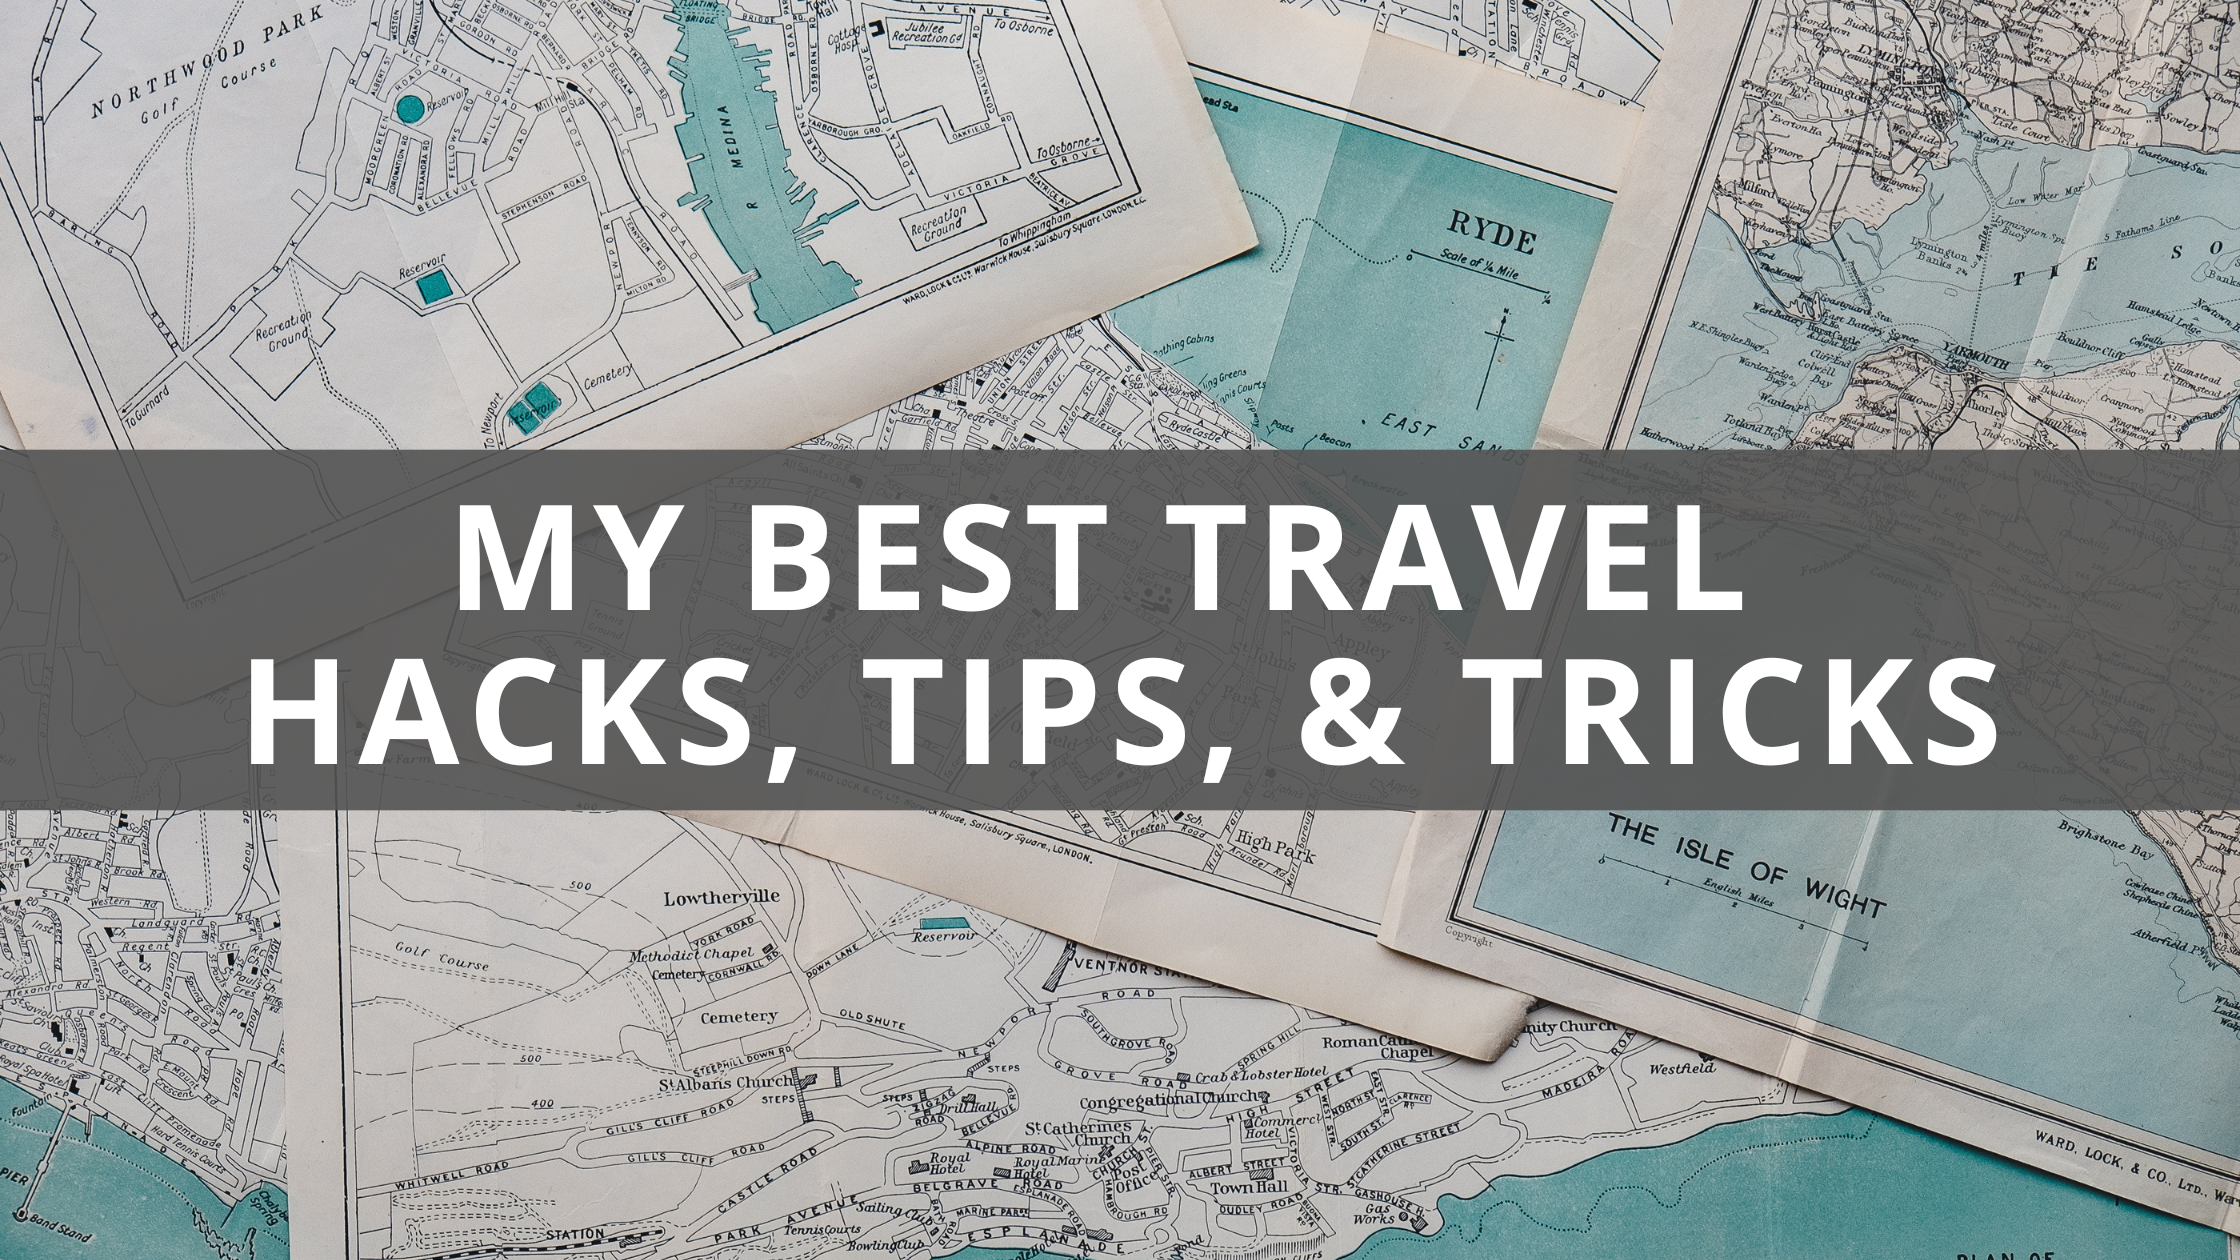 My 100+ Best Travel Tips, Tricks, and Hacks: An Ultimate List